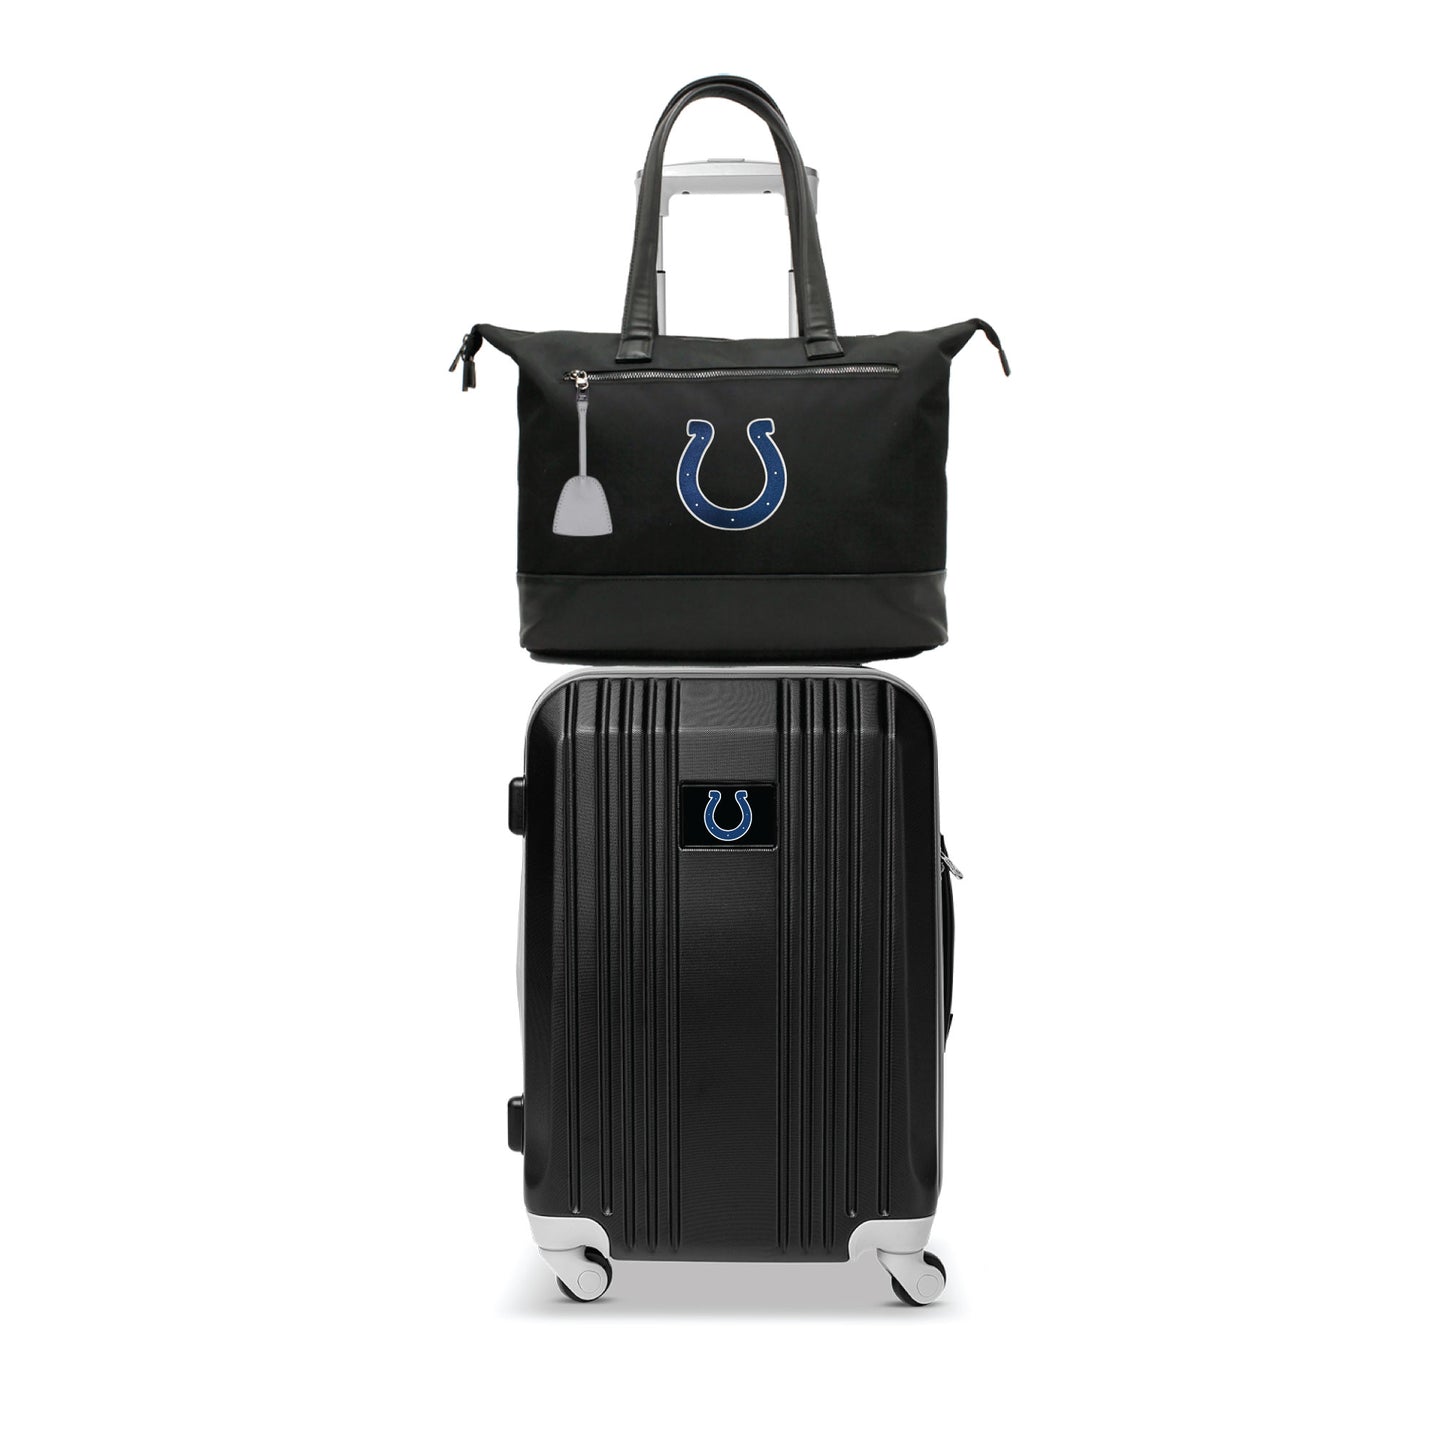 Indianapolis Colts Premium Laptop Tote Bag and Luggage Set